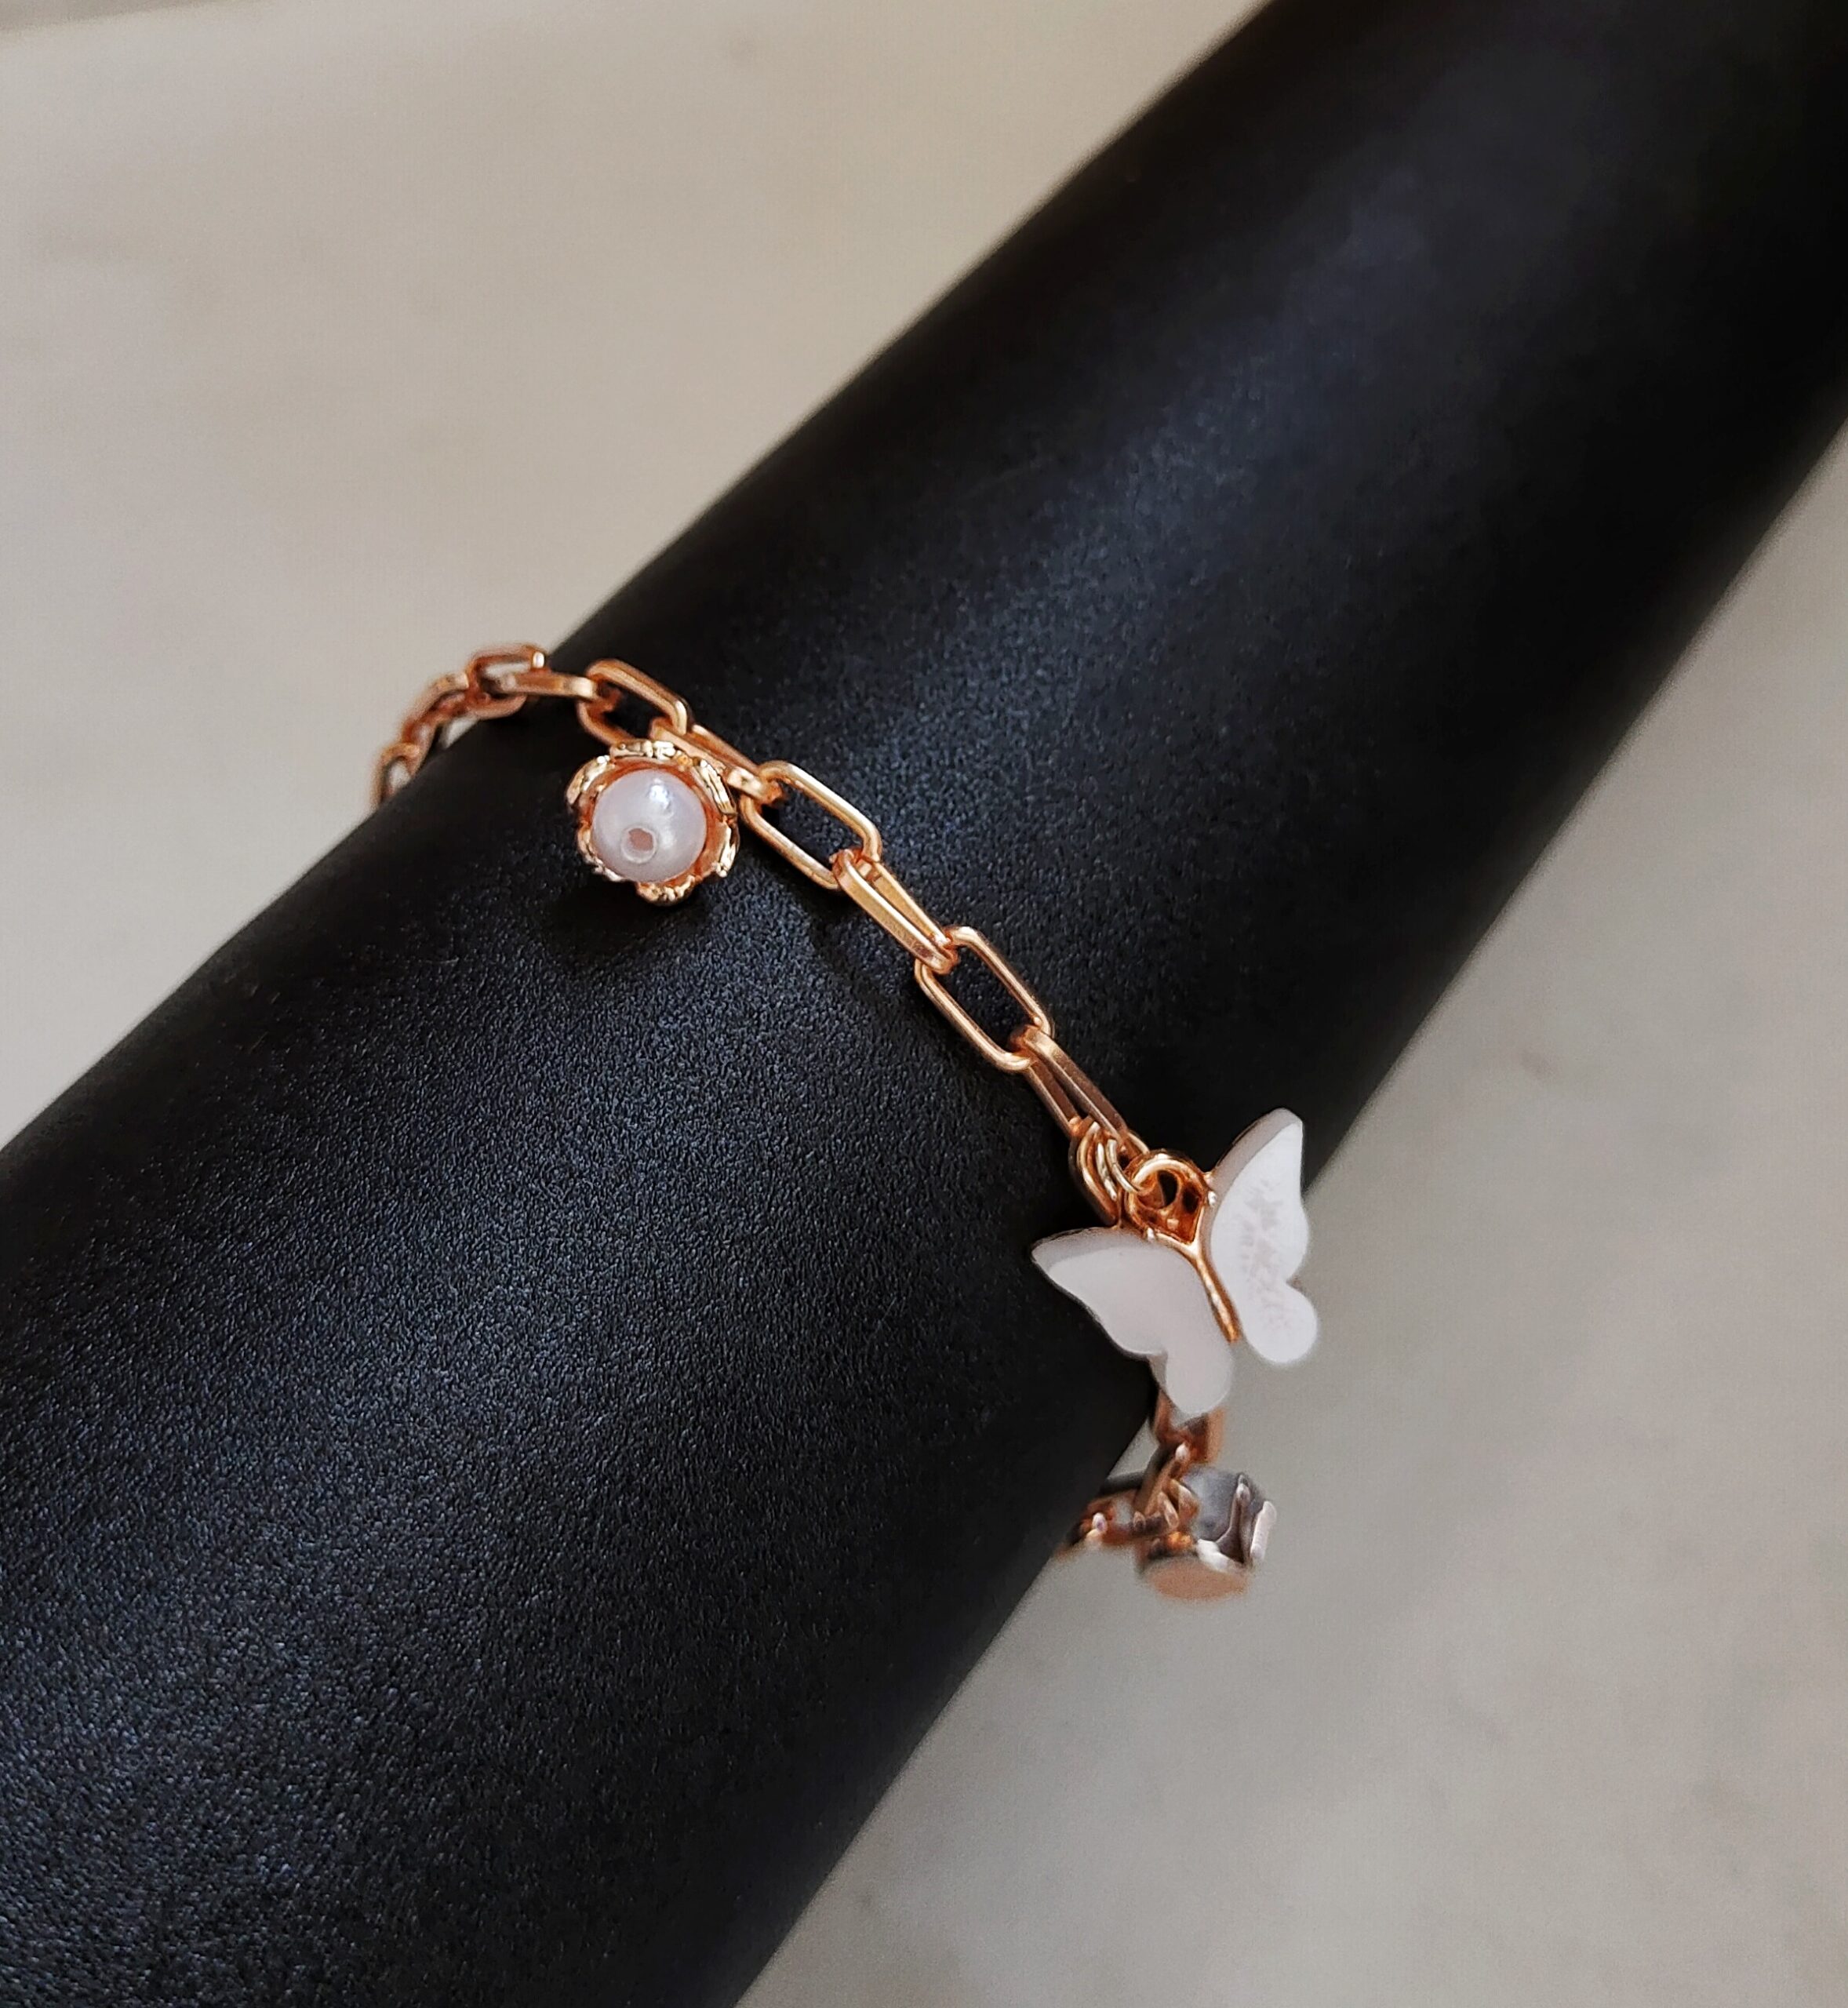 Real Rose Gold Bracelet for Womens at Candere by Kalyan Jewellers.